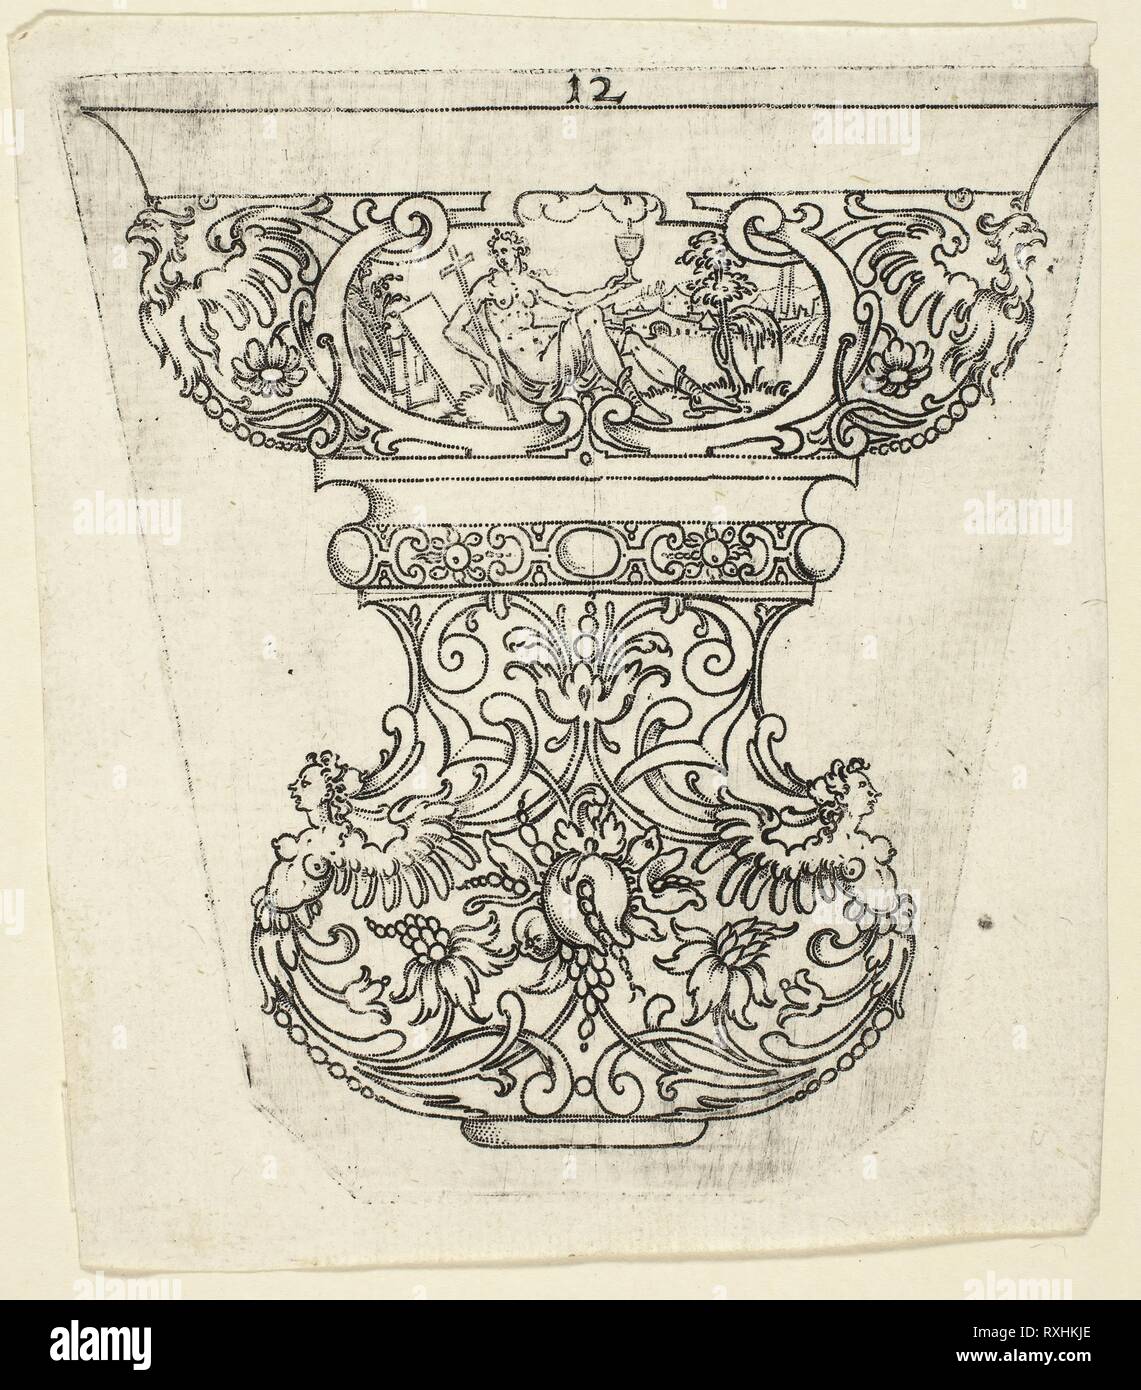 Plate 12, from twenty ornamental designs for goblets and beakers. Master A.P.; German, active early 17th century. Date: 1604. Dimensions: 125 x 120 mm (image); 130 x 125 mm (plate); 145 x 130 mm (sheet). Punch engraving in black on ivory laid paper. Origin: Germany. Museum: The Chicago Art Institute. Stock Photo